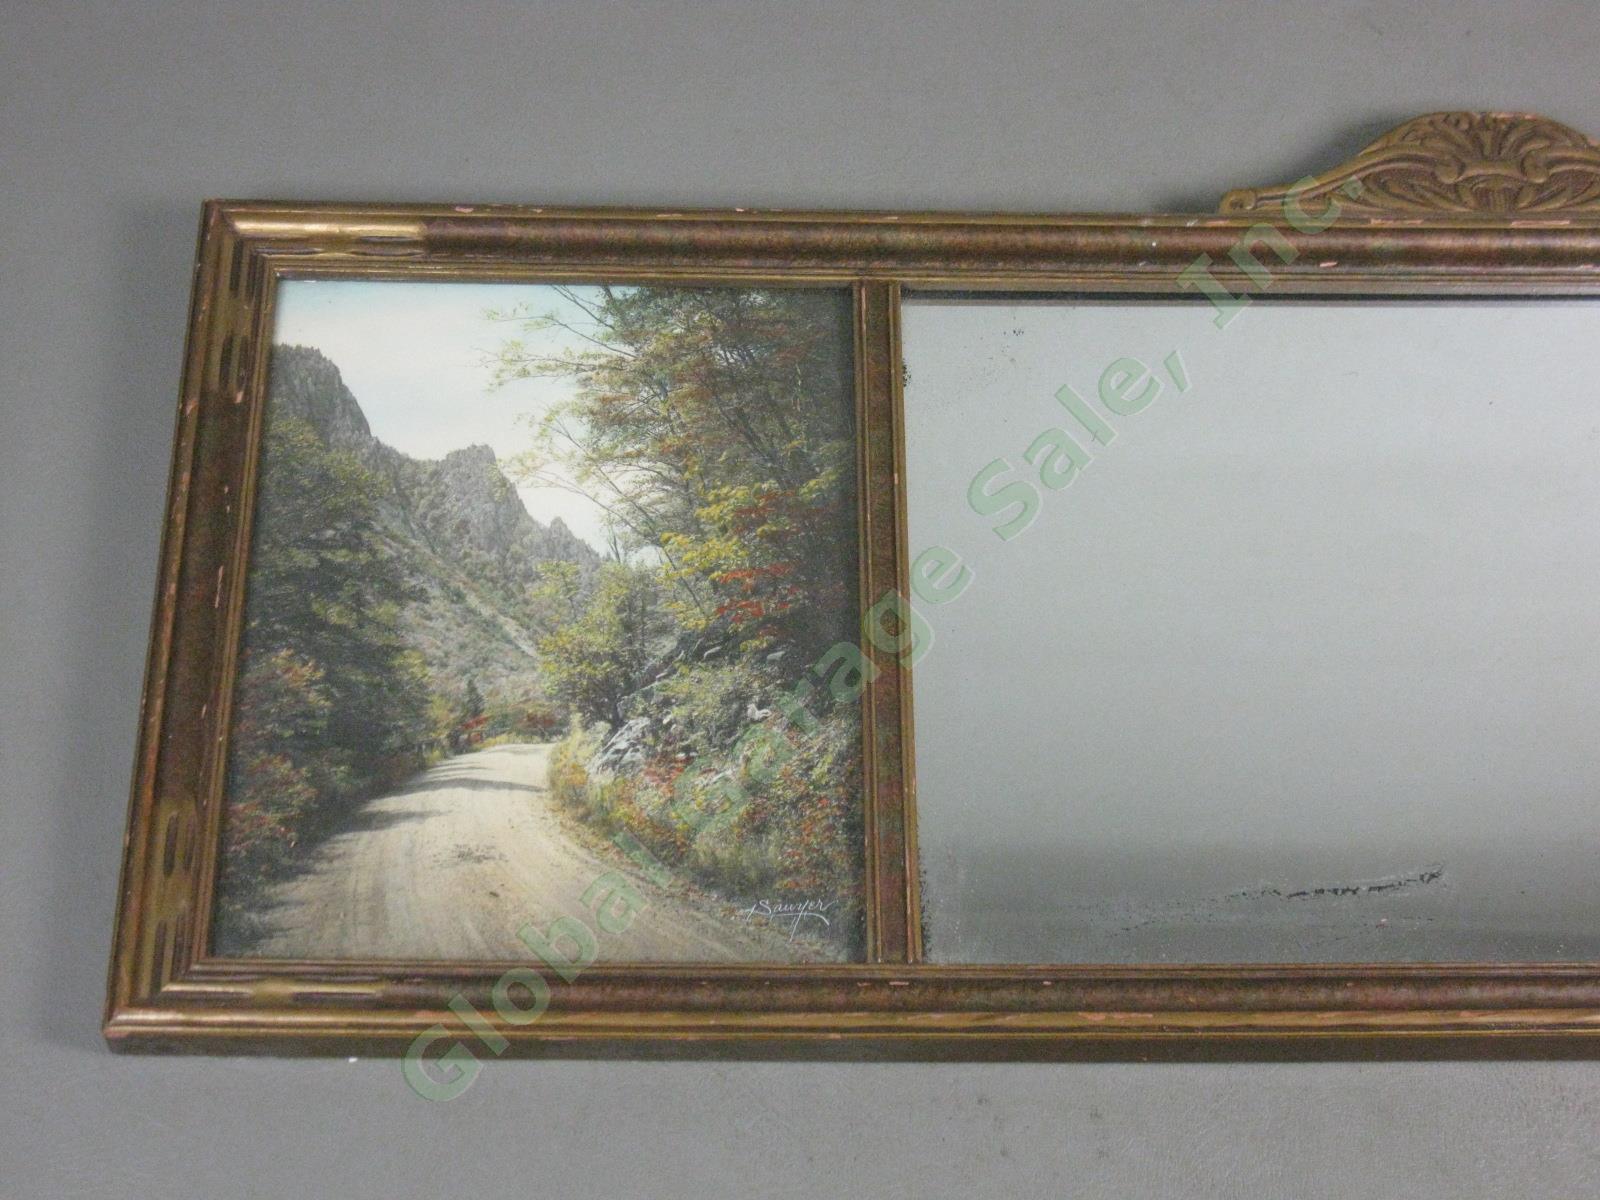 Antique 1920s Wall Mirror Charles Sawyer Hand Colored Photos Franconia Notch NH 1